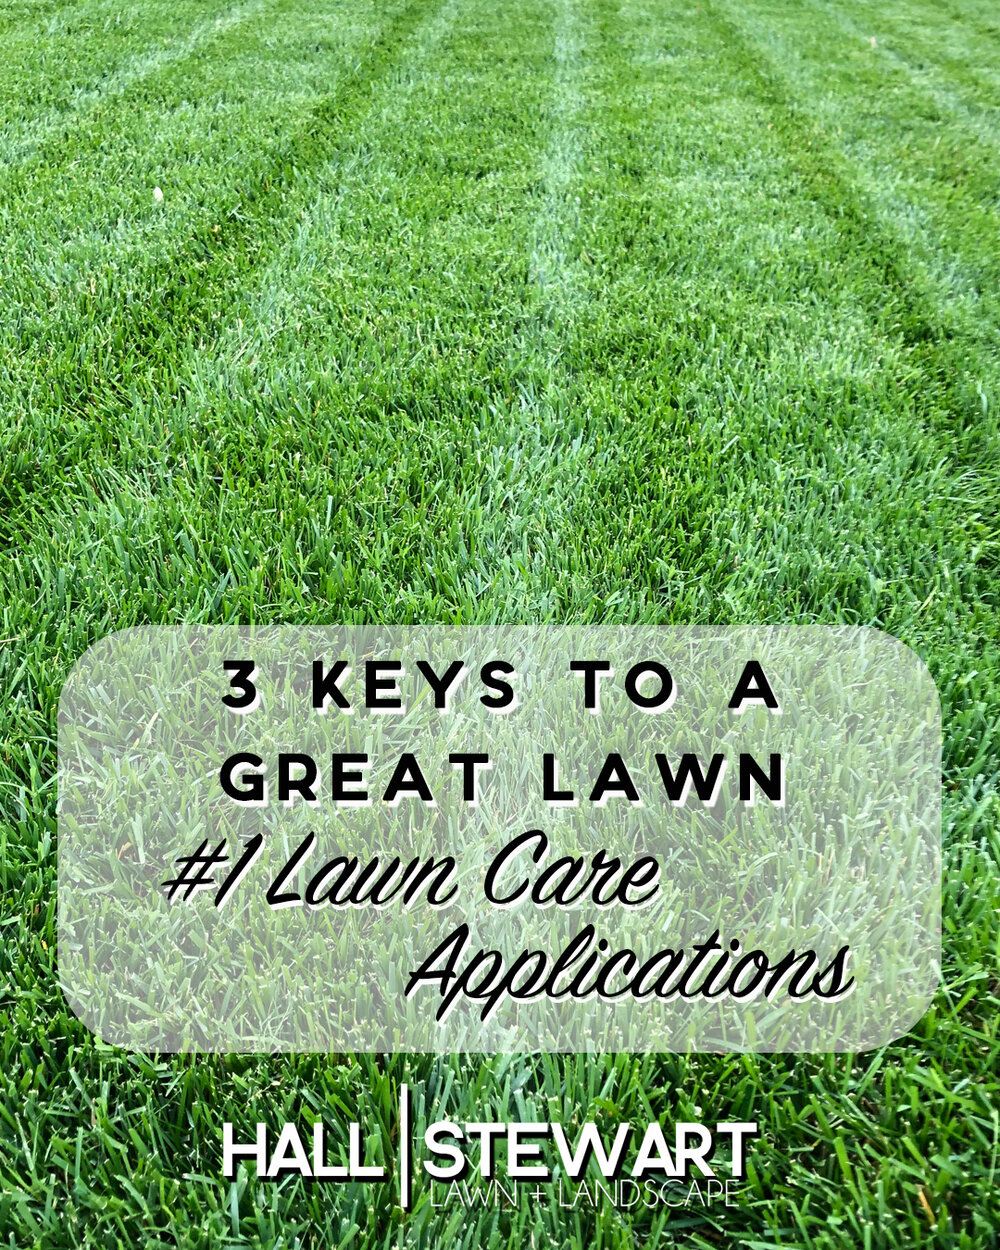 Lawn Care S, Stewart Lawn And Landscape